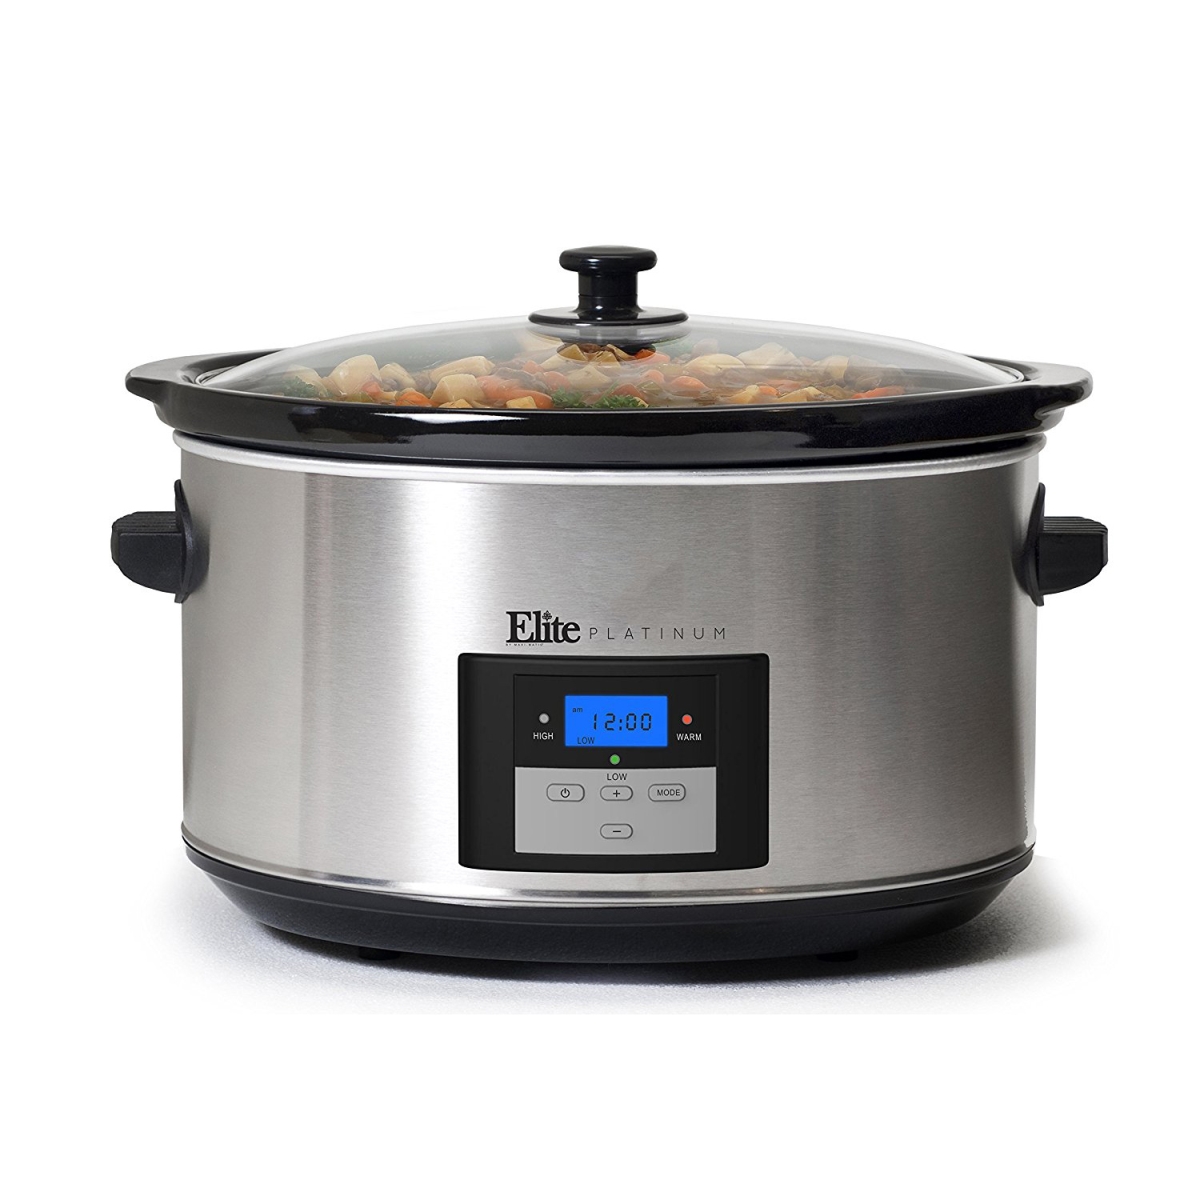 Mst900d 8.5 Qt. Digital Slow Cooker With Lid, Stainless Steel